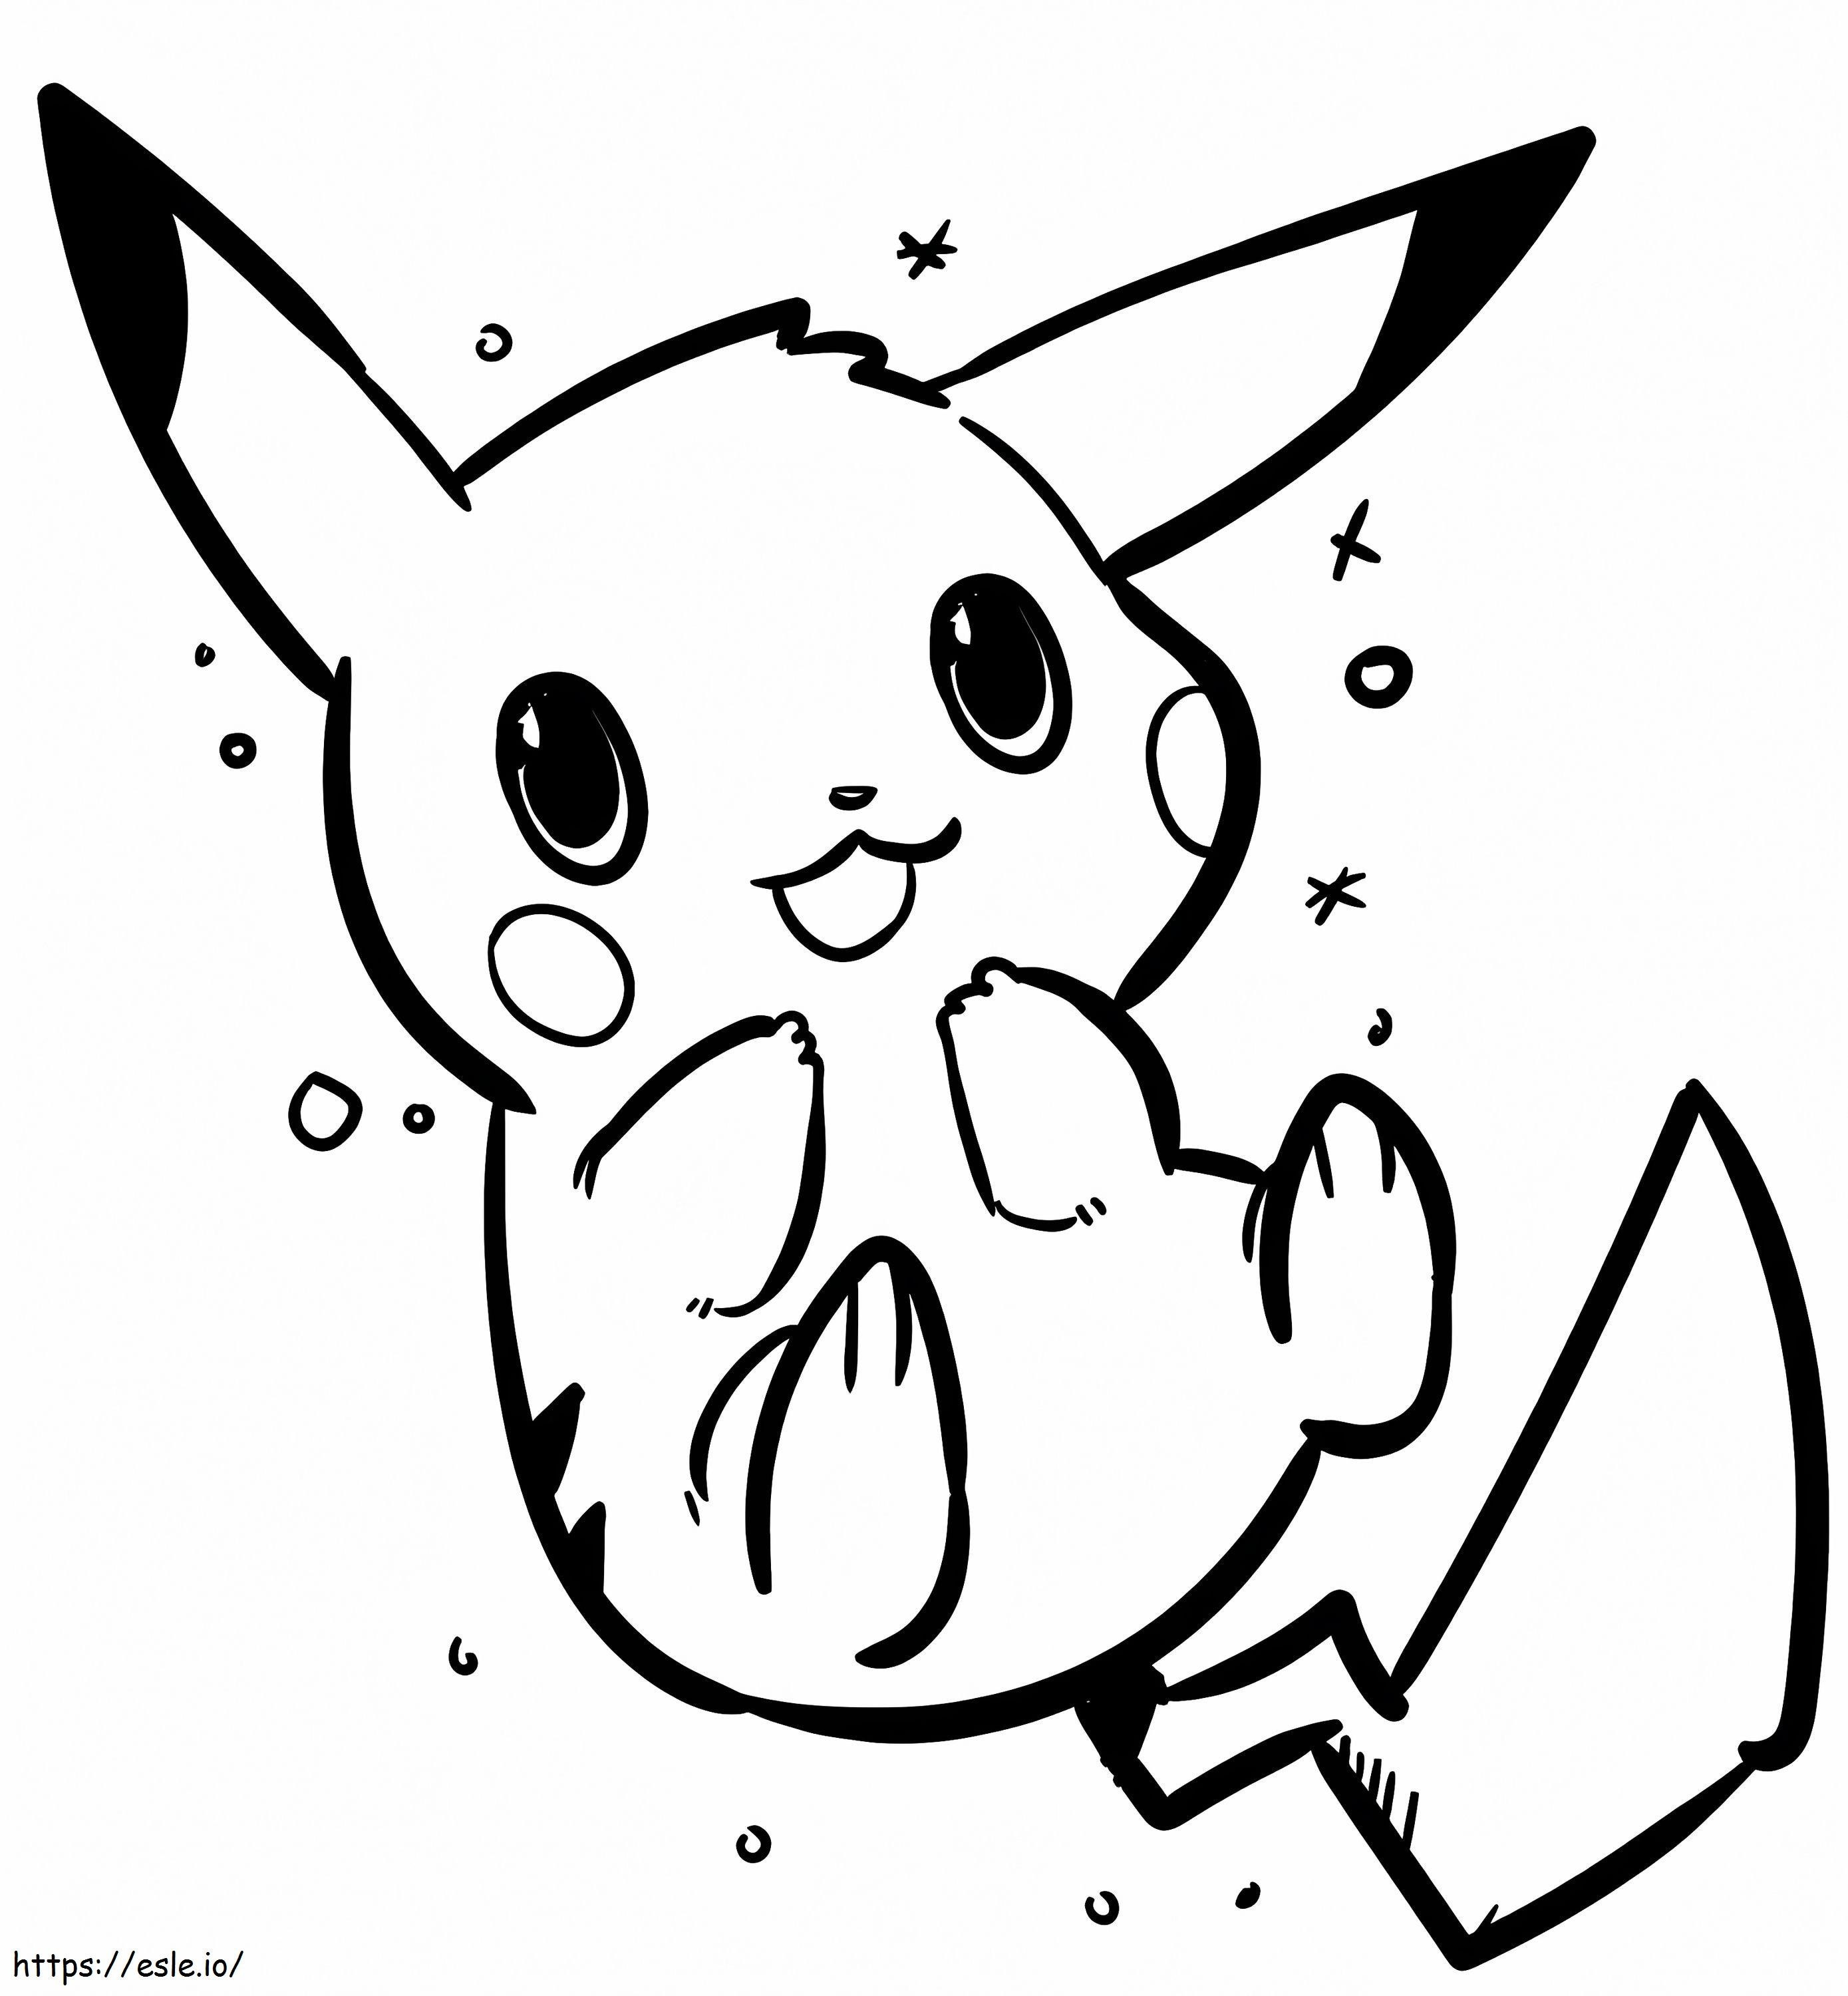 Baby Pikachu coloring page